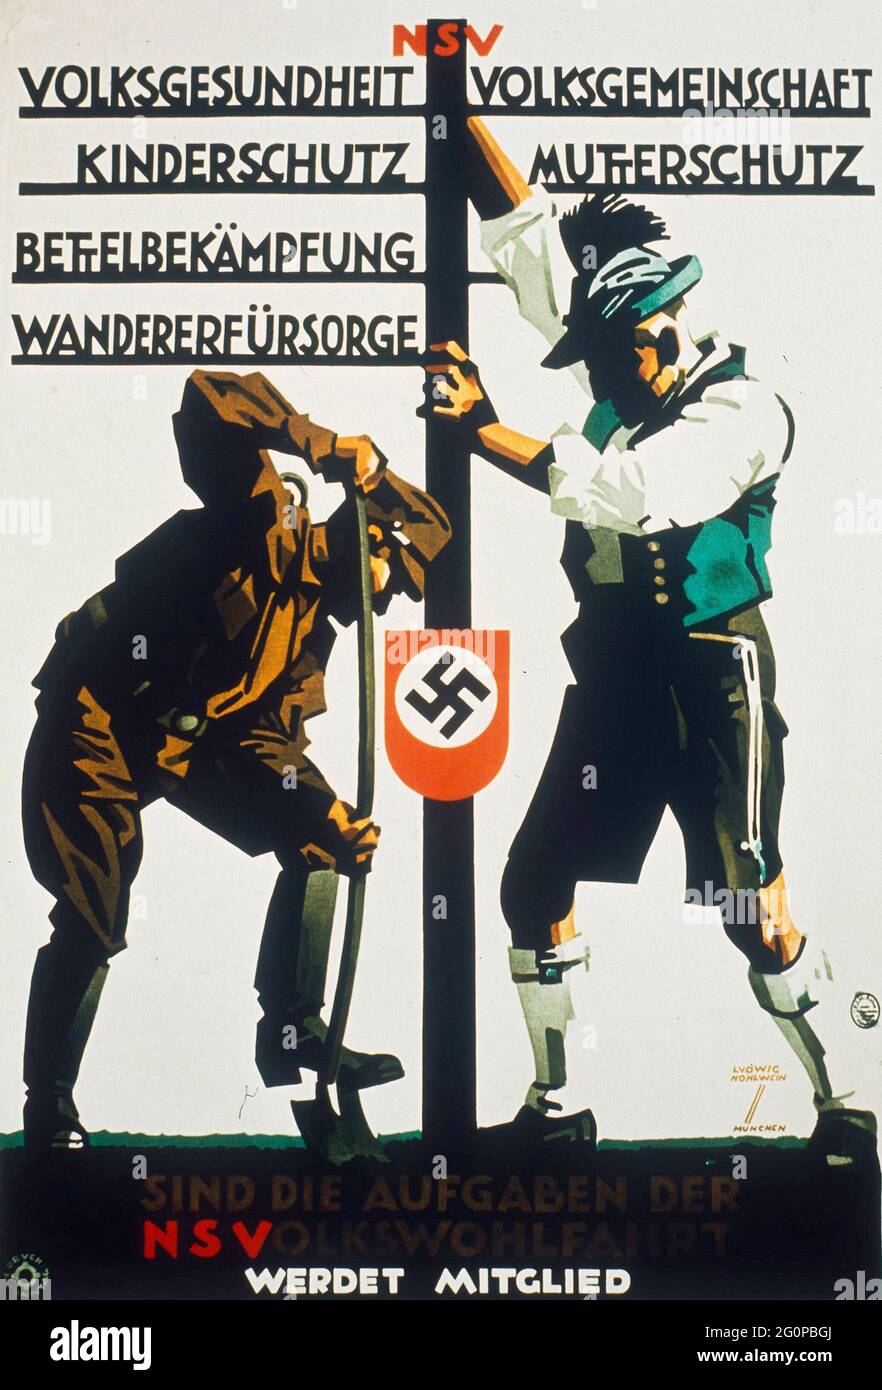 A vintage Nazi propaganda poster for the Nazi welfare service showing a soldier and peasant digging together Stock Photo